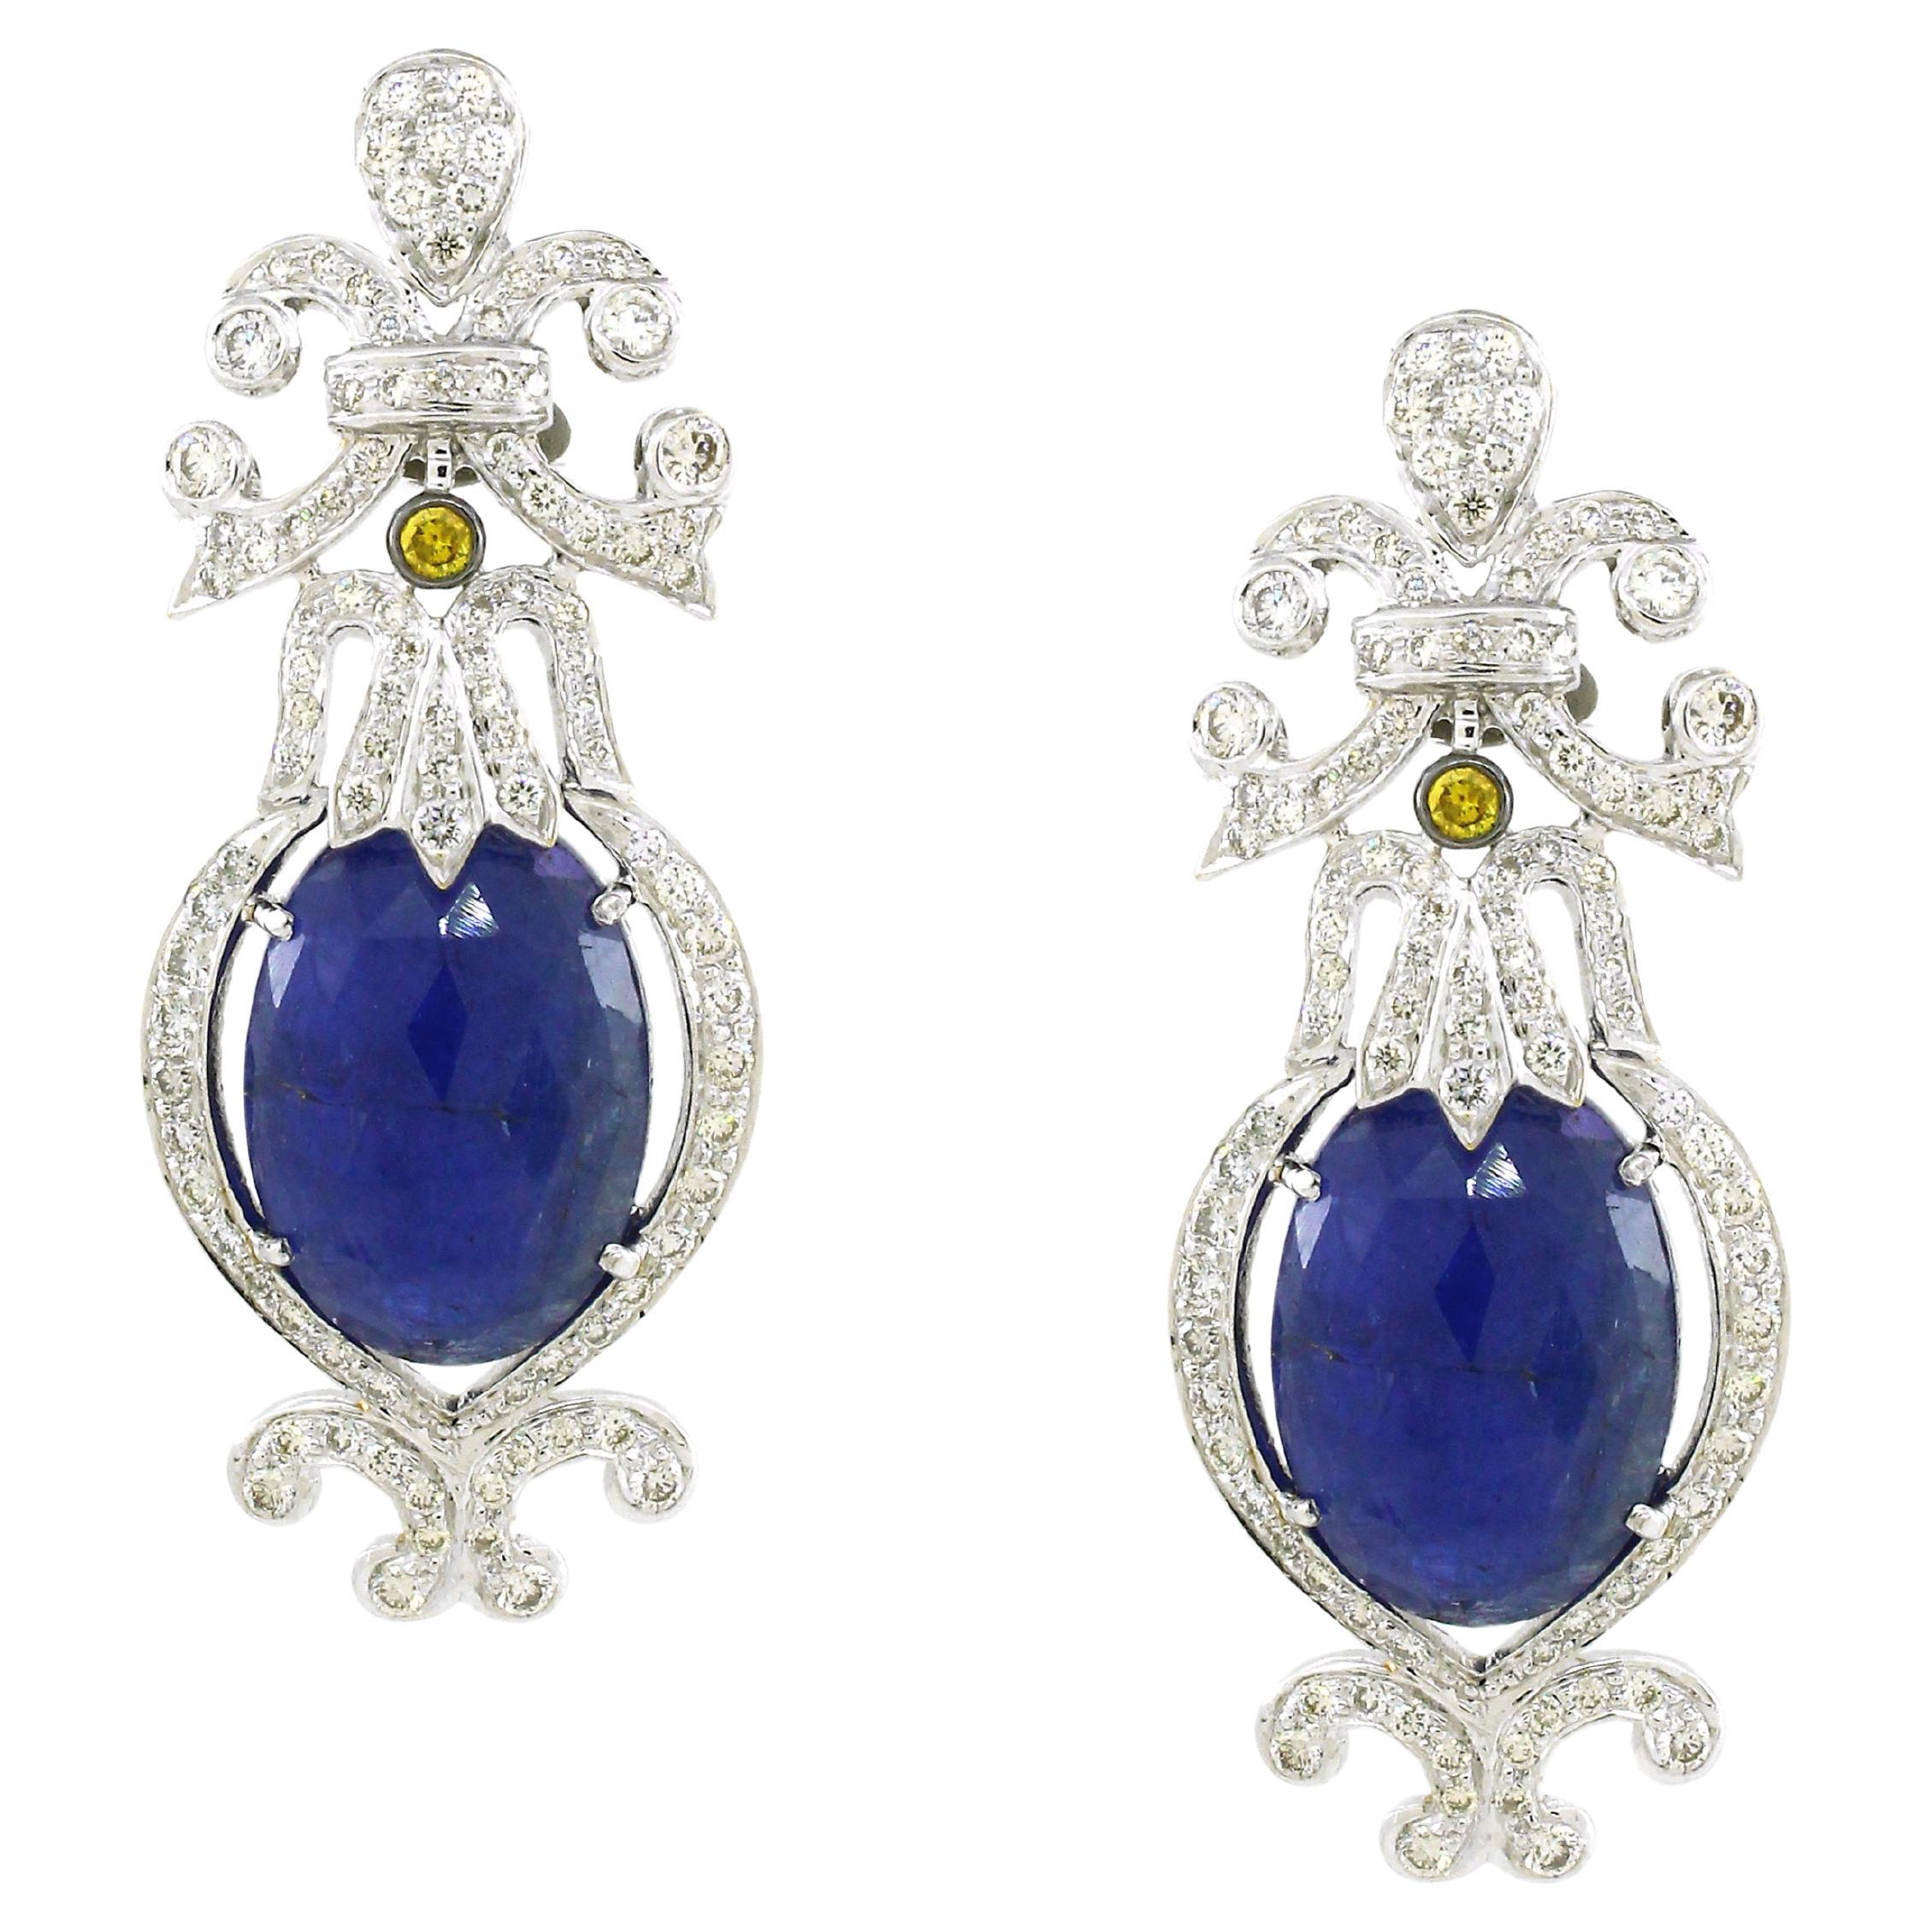 16.45 carats of Tanzanite Earrings For Sale